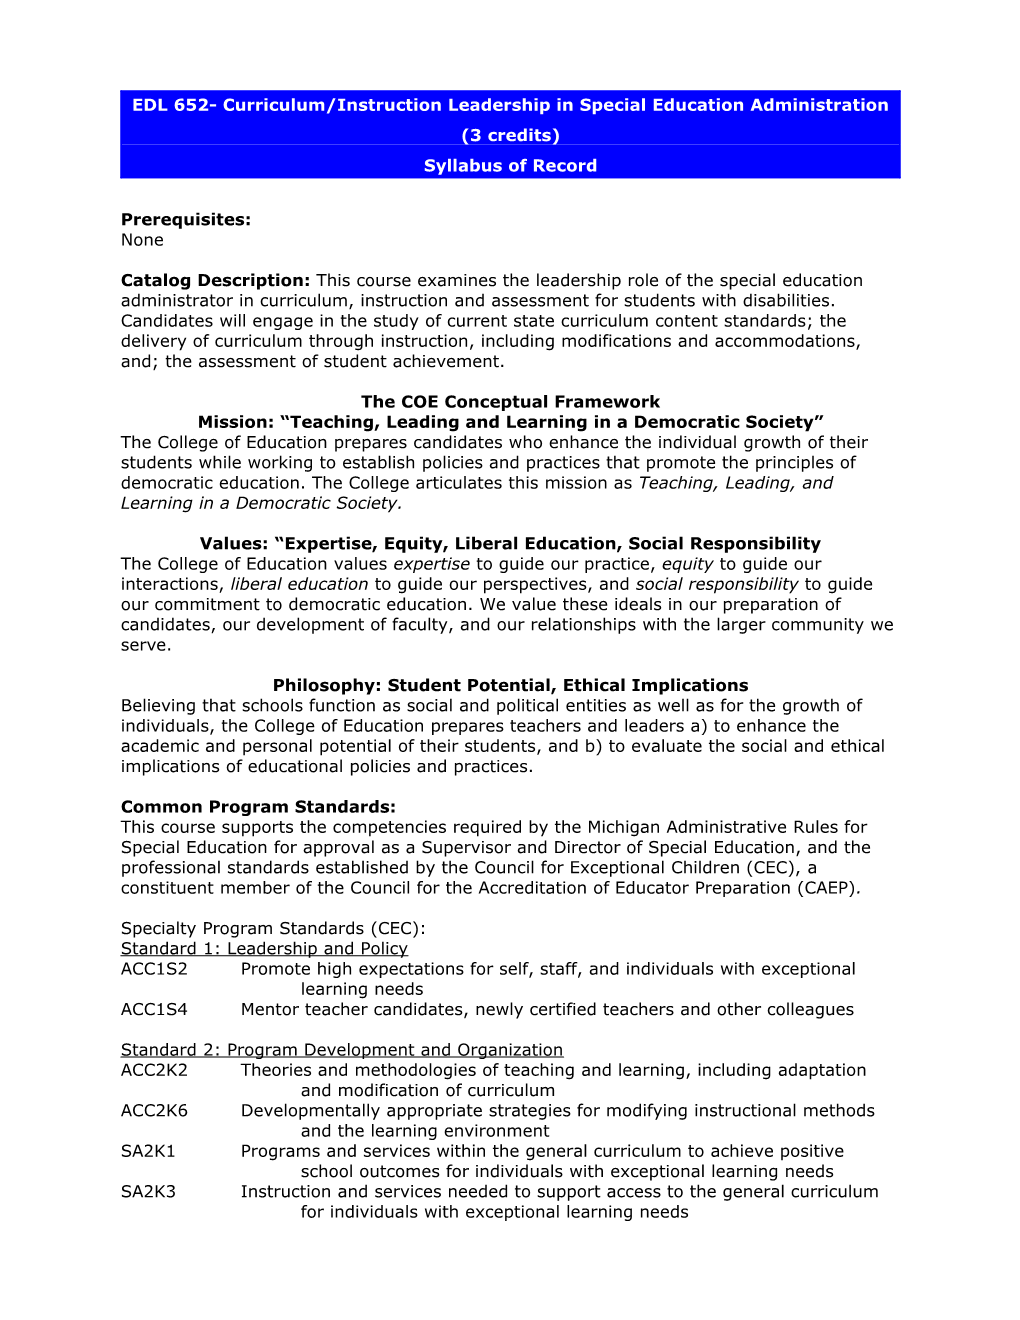 EDS 666 Syllabus of Record: Curriculum Leadership in Special Education Administration